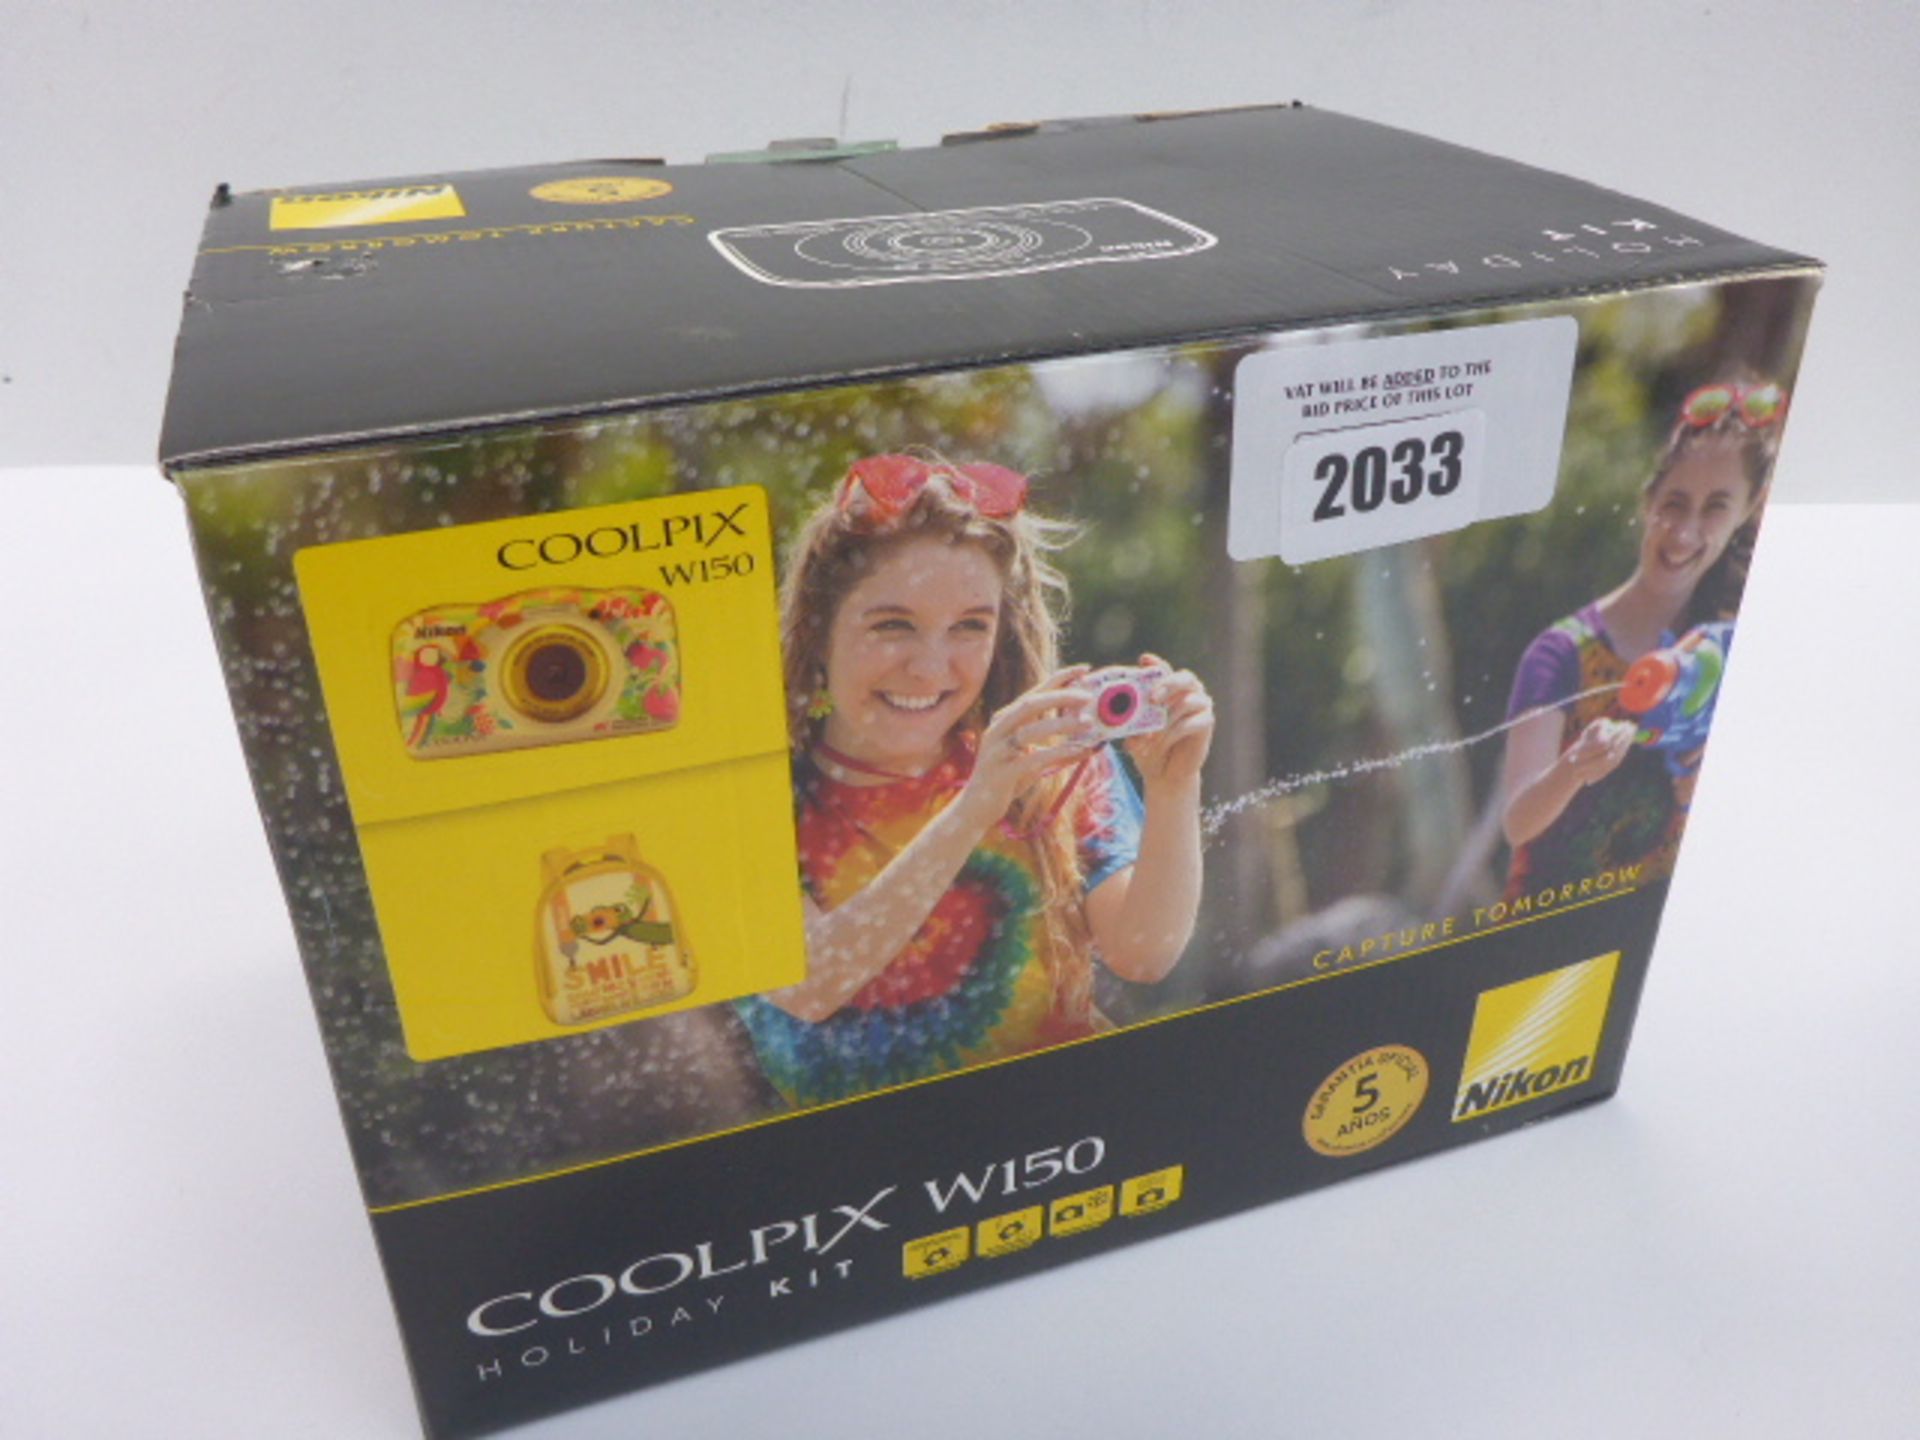 Nikon Coolpic w150 holiday kit boxed, includes w150 coolpix camera.